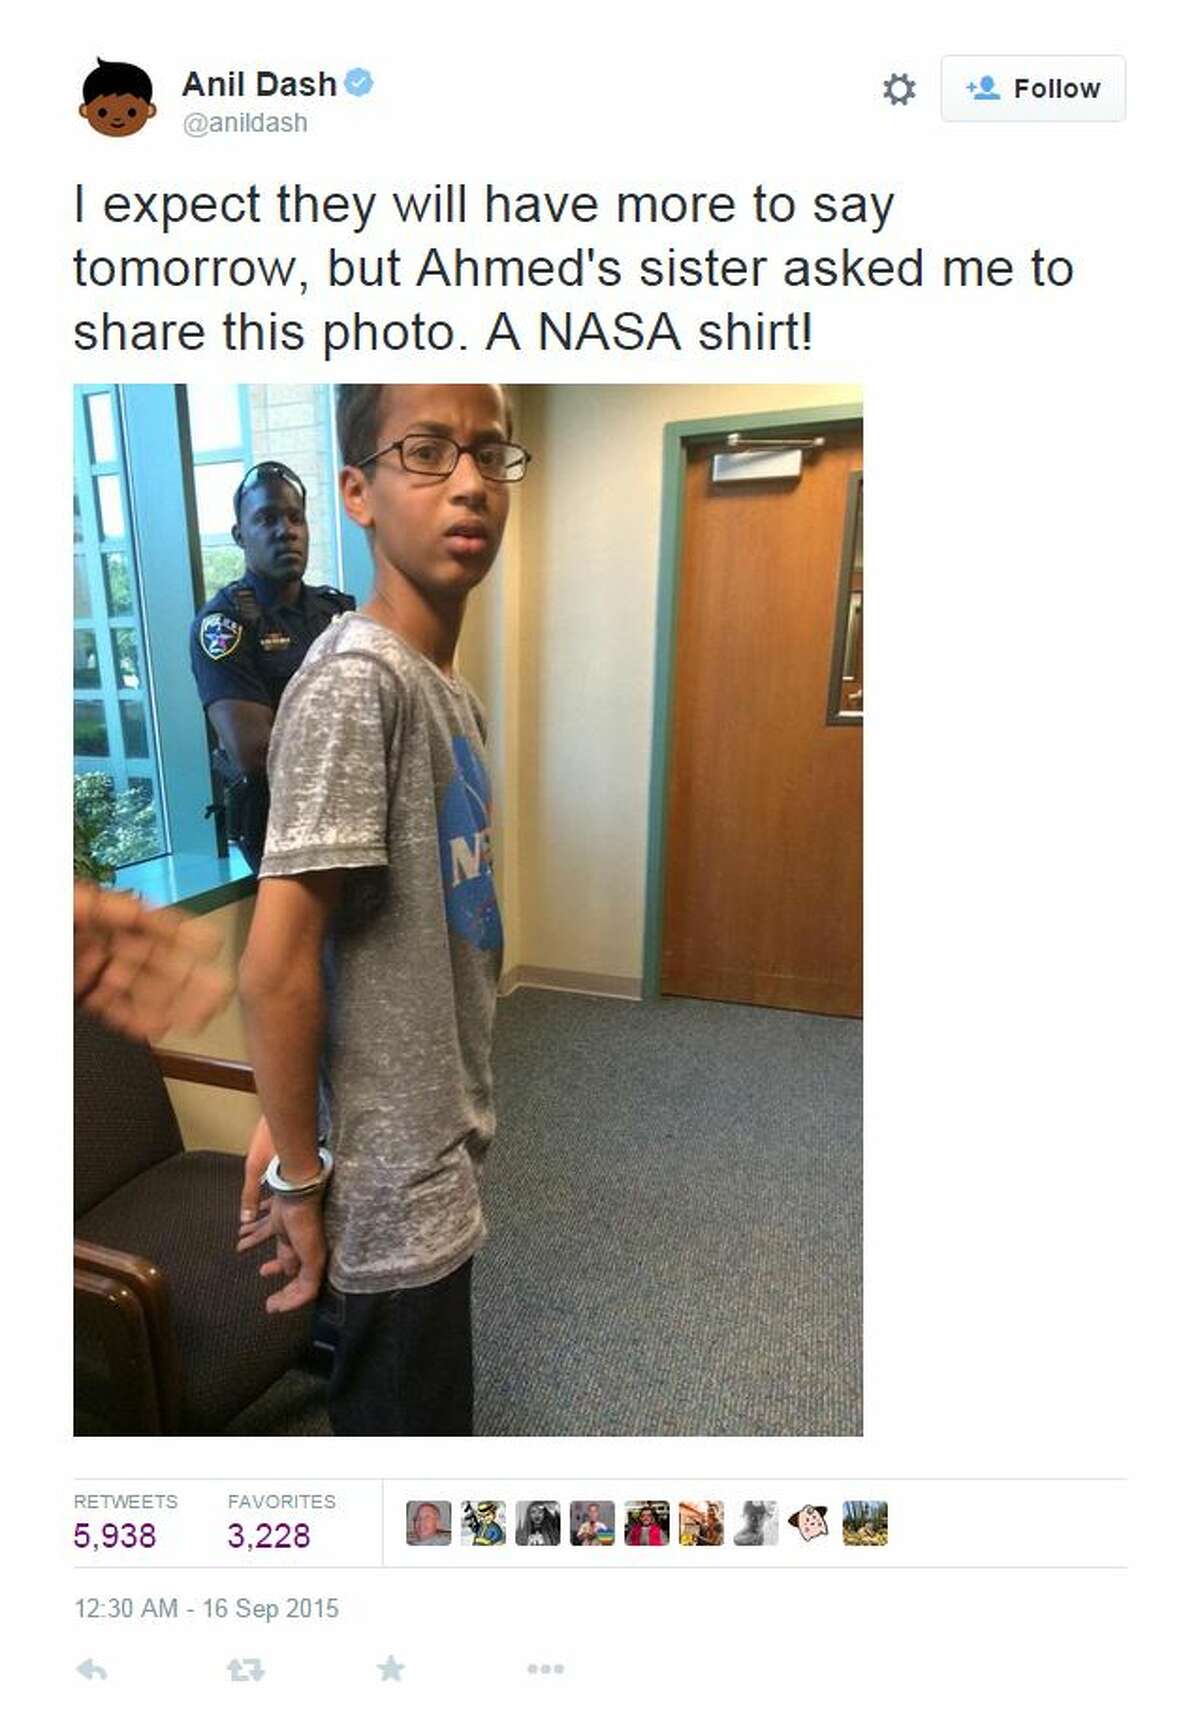 Irving police officers arrested Ahmed for "possessing a hoax bomb" and escorted him from the school in handcuffs. Irving police spokesman James McLellan told The Dallas Morning News: “He kept maintaining it was a clock, but there was no broader explanation.”